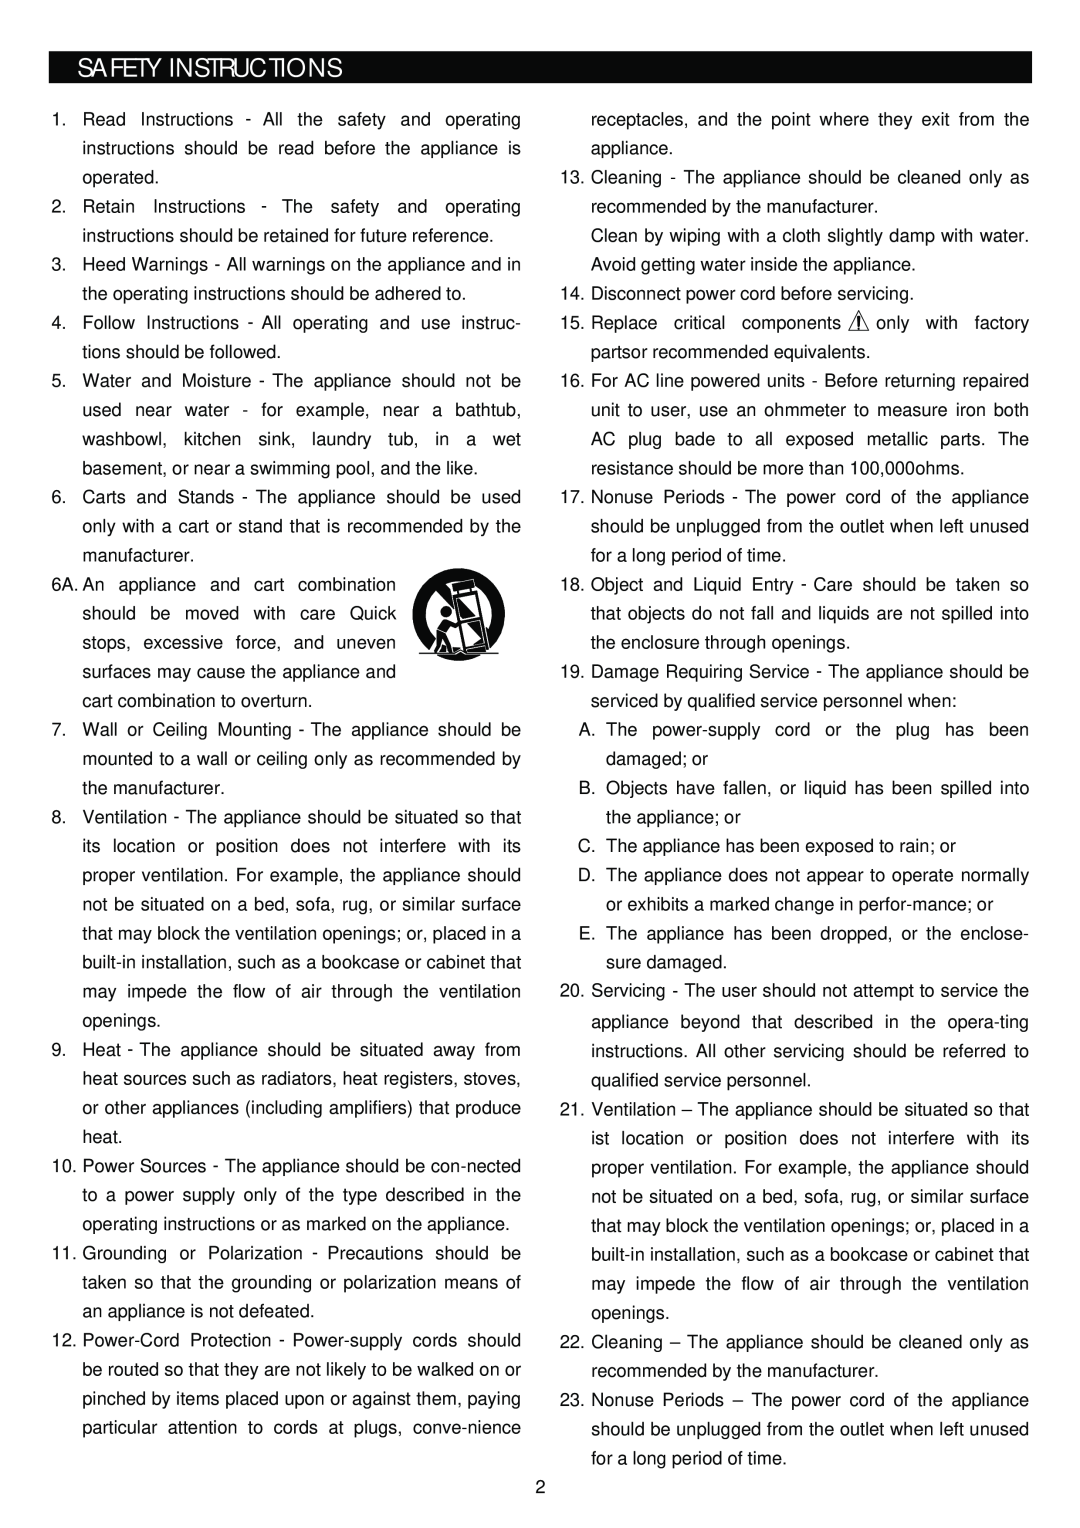 Stanton S-700 manual Safety Instructions 